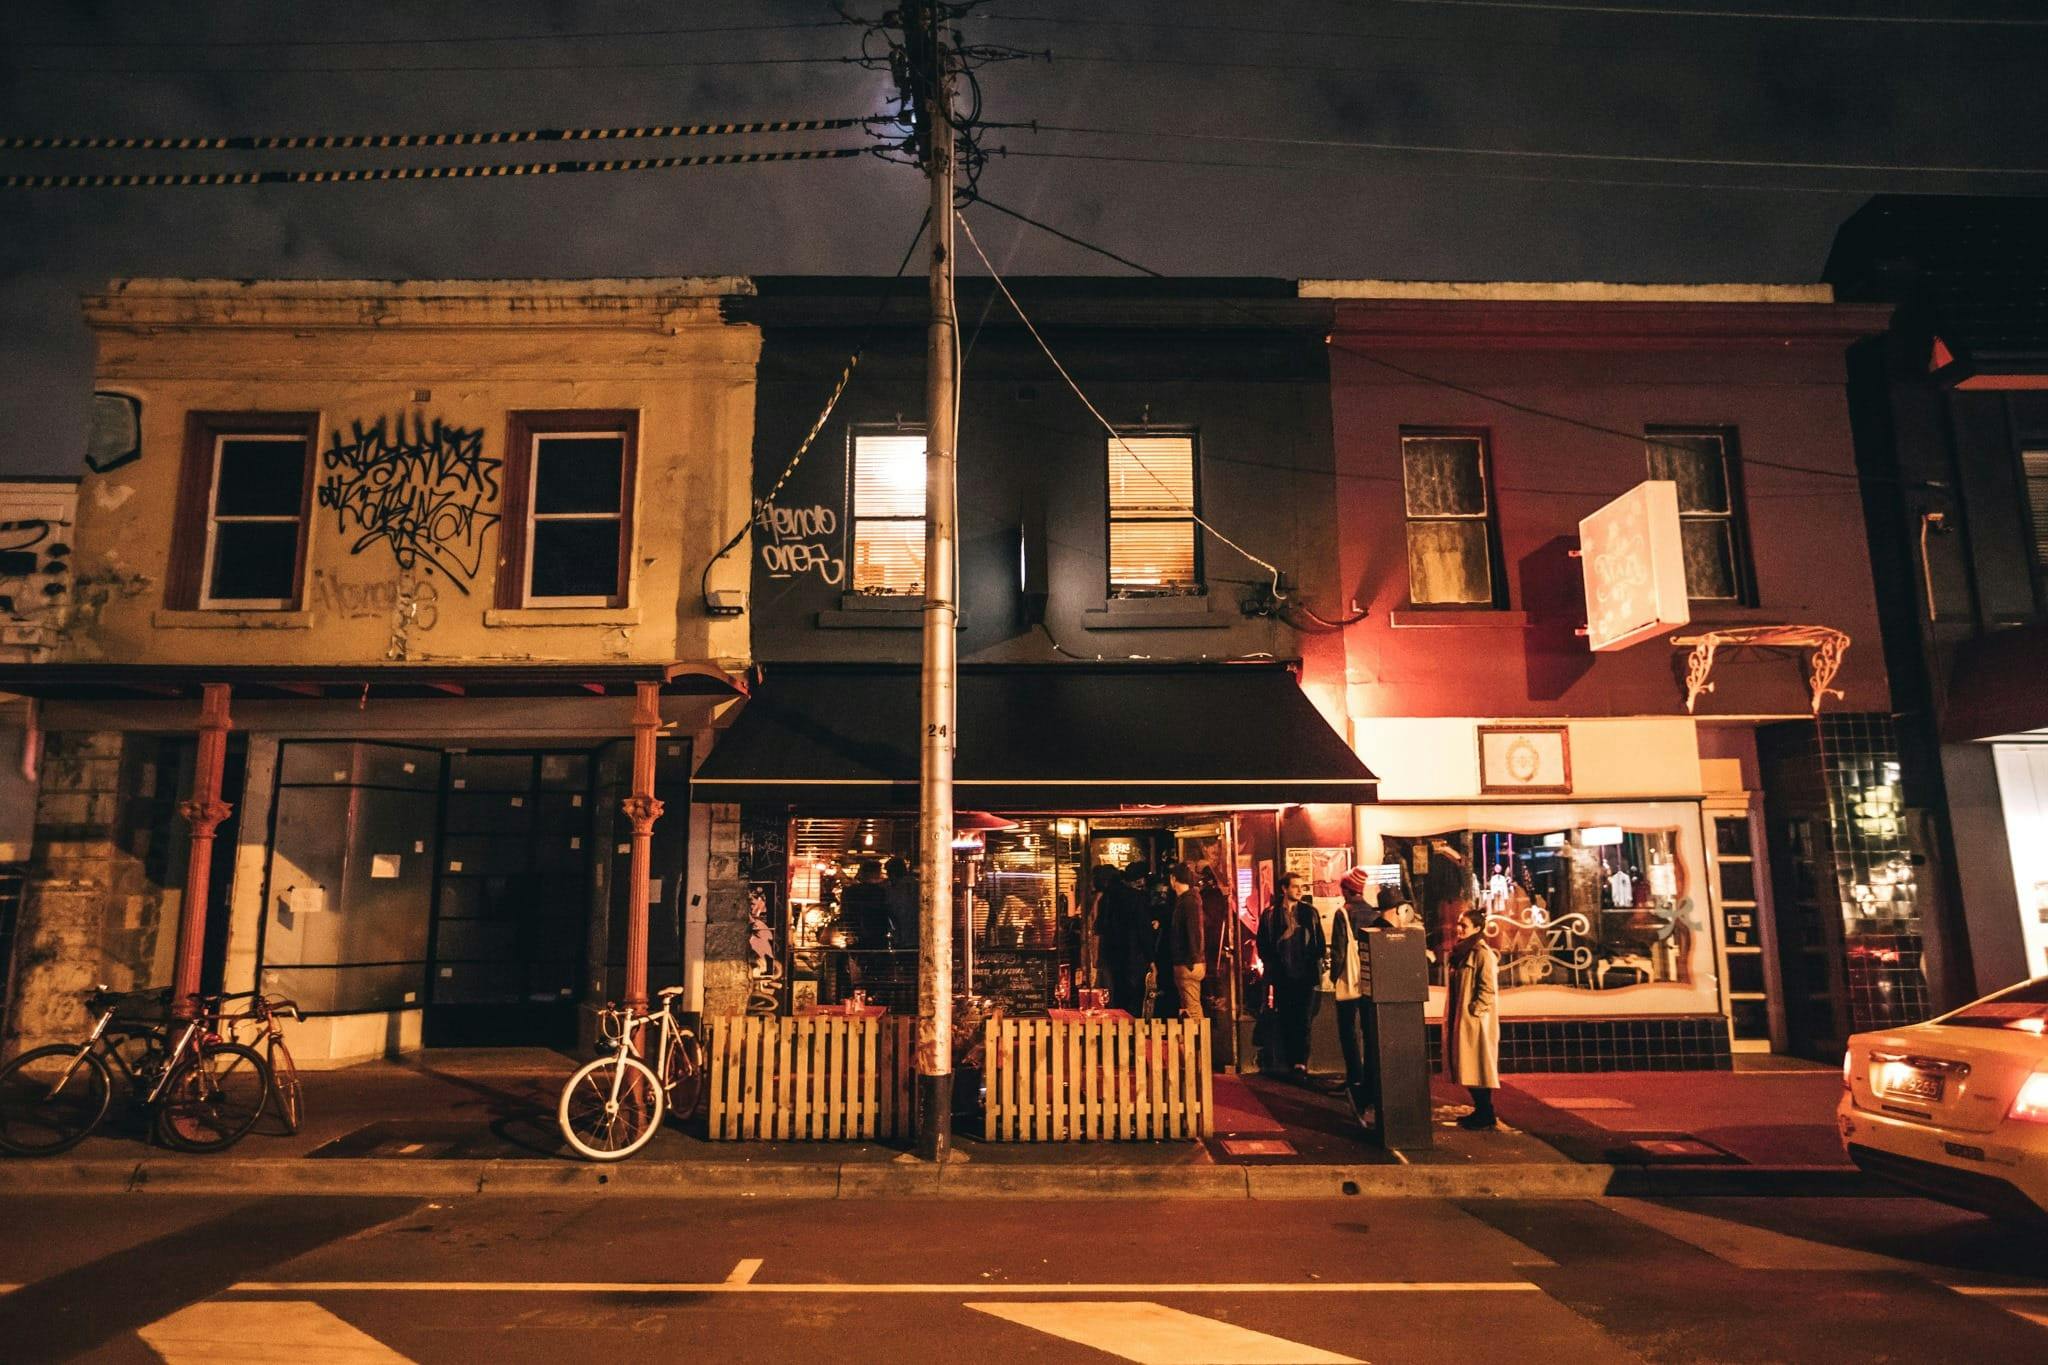 Nightime street view of The Rooks Return Bar on Brunswick St, in Fitzroy with groups of people chatting outside, a bike locked up to a power pole and buiolding lit up.